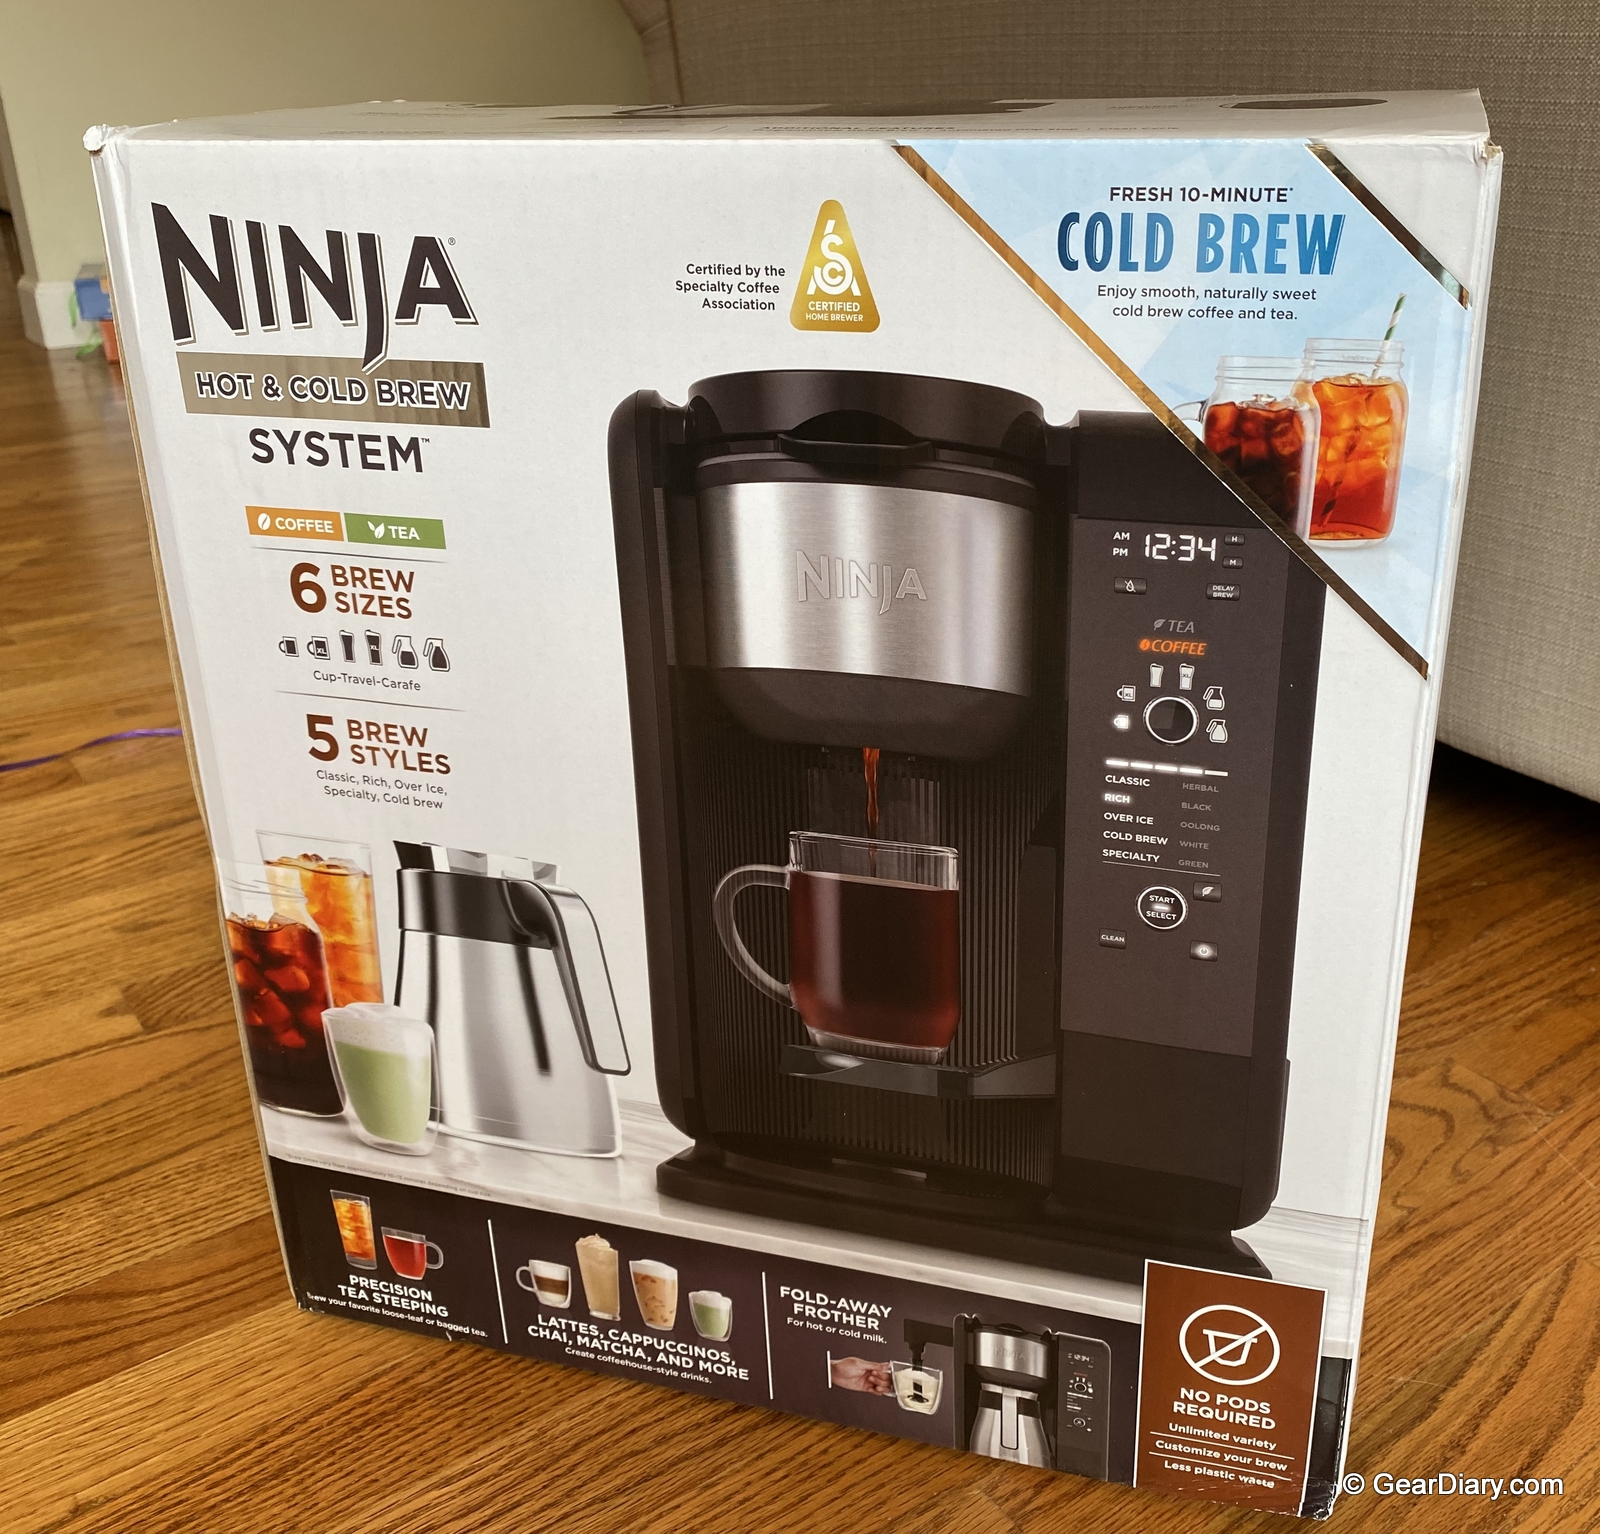 The Ninja Hot and Iced Coffee maker will complete any coffee